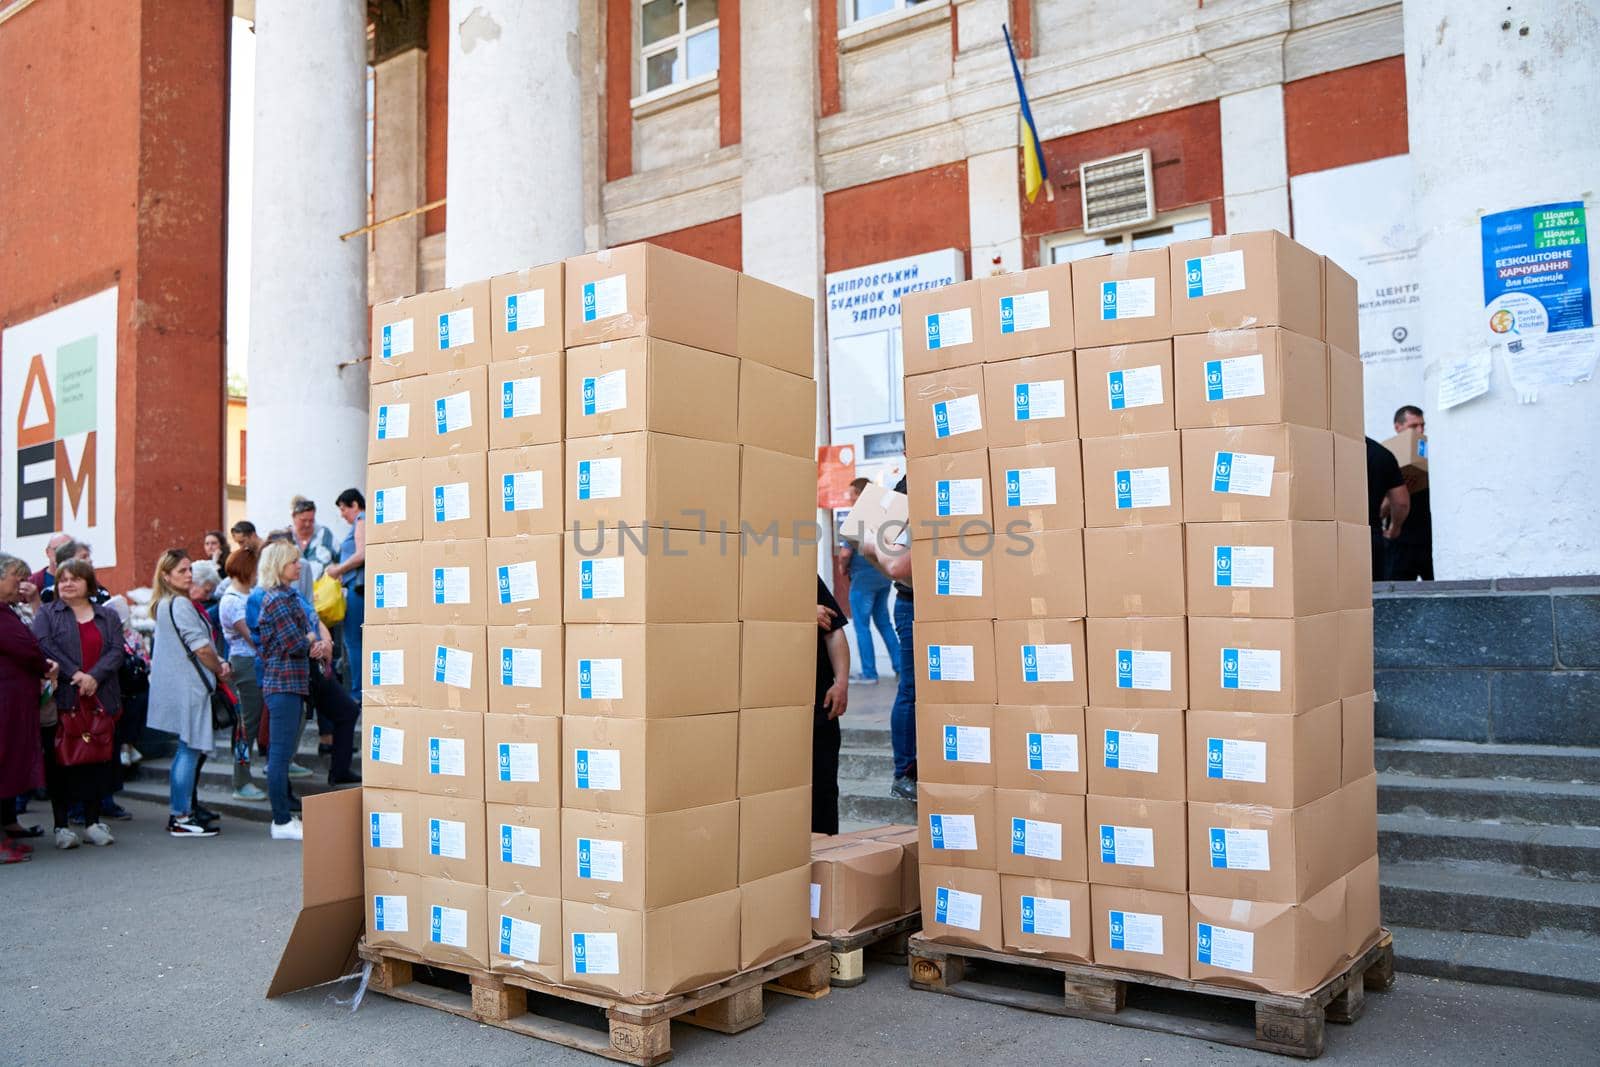 A batch of humanitarian aid was delivered to the volunteer center to help temporarily displaced persons. Dnipro, Ukraine - 06.30.2022